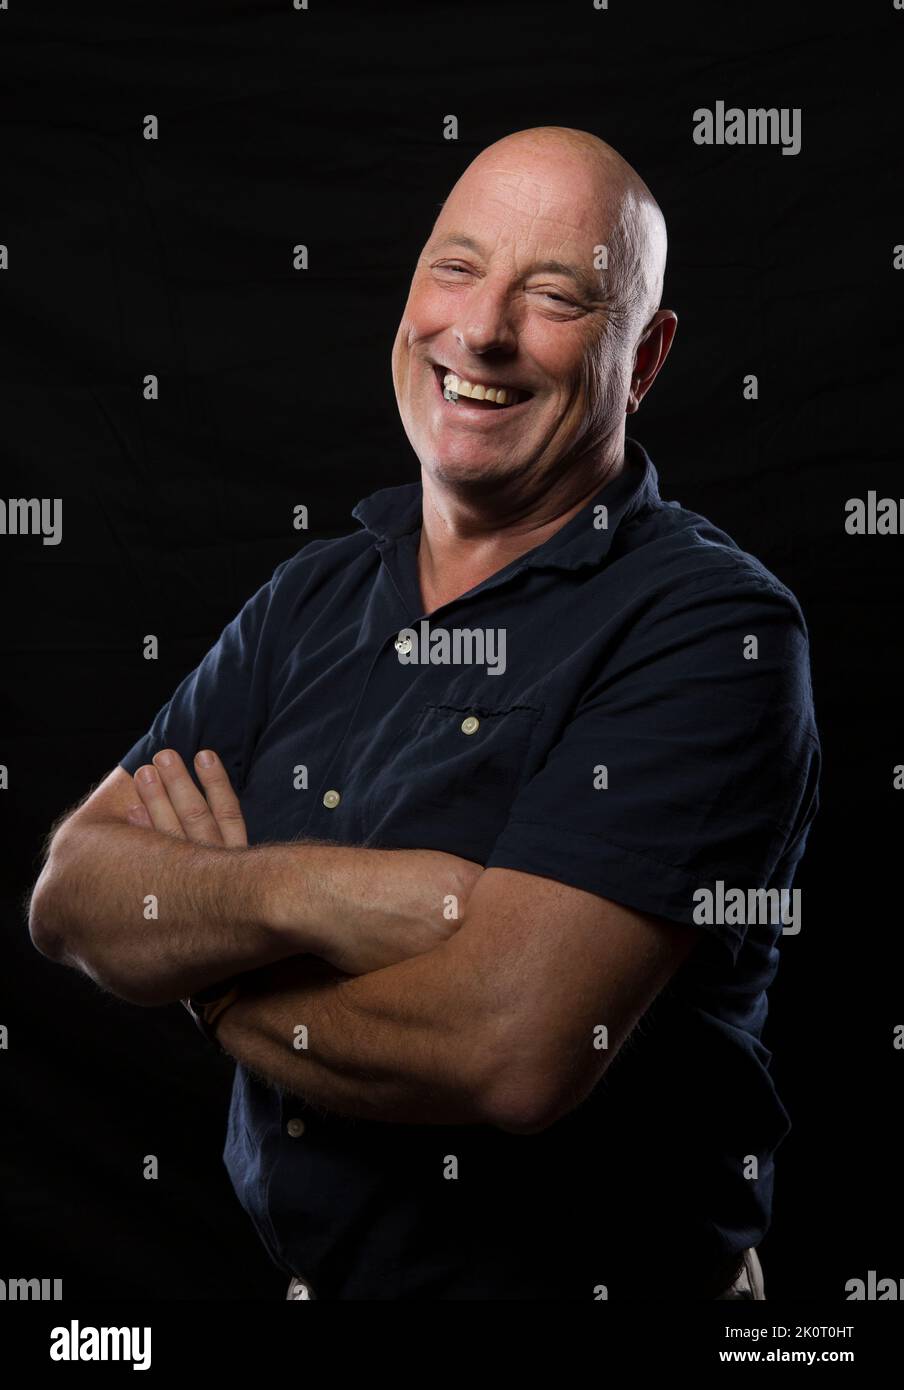 Middle aged man with arms folder and laughing into camera. Stock Photo